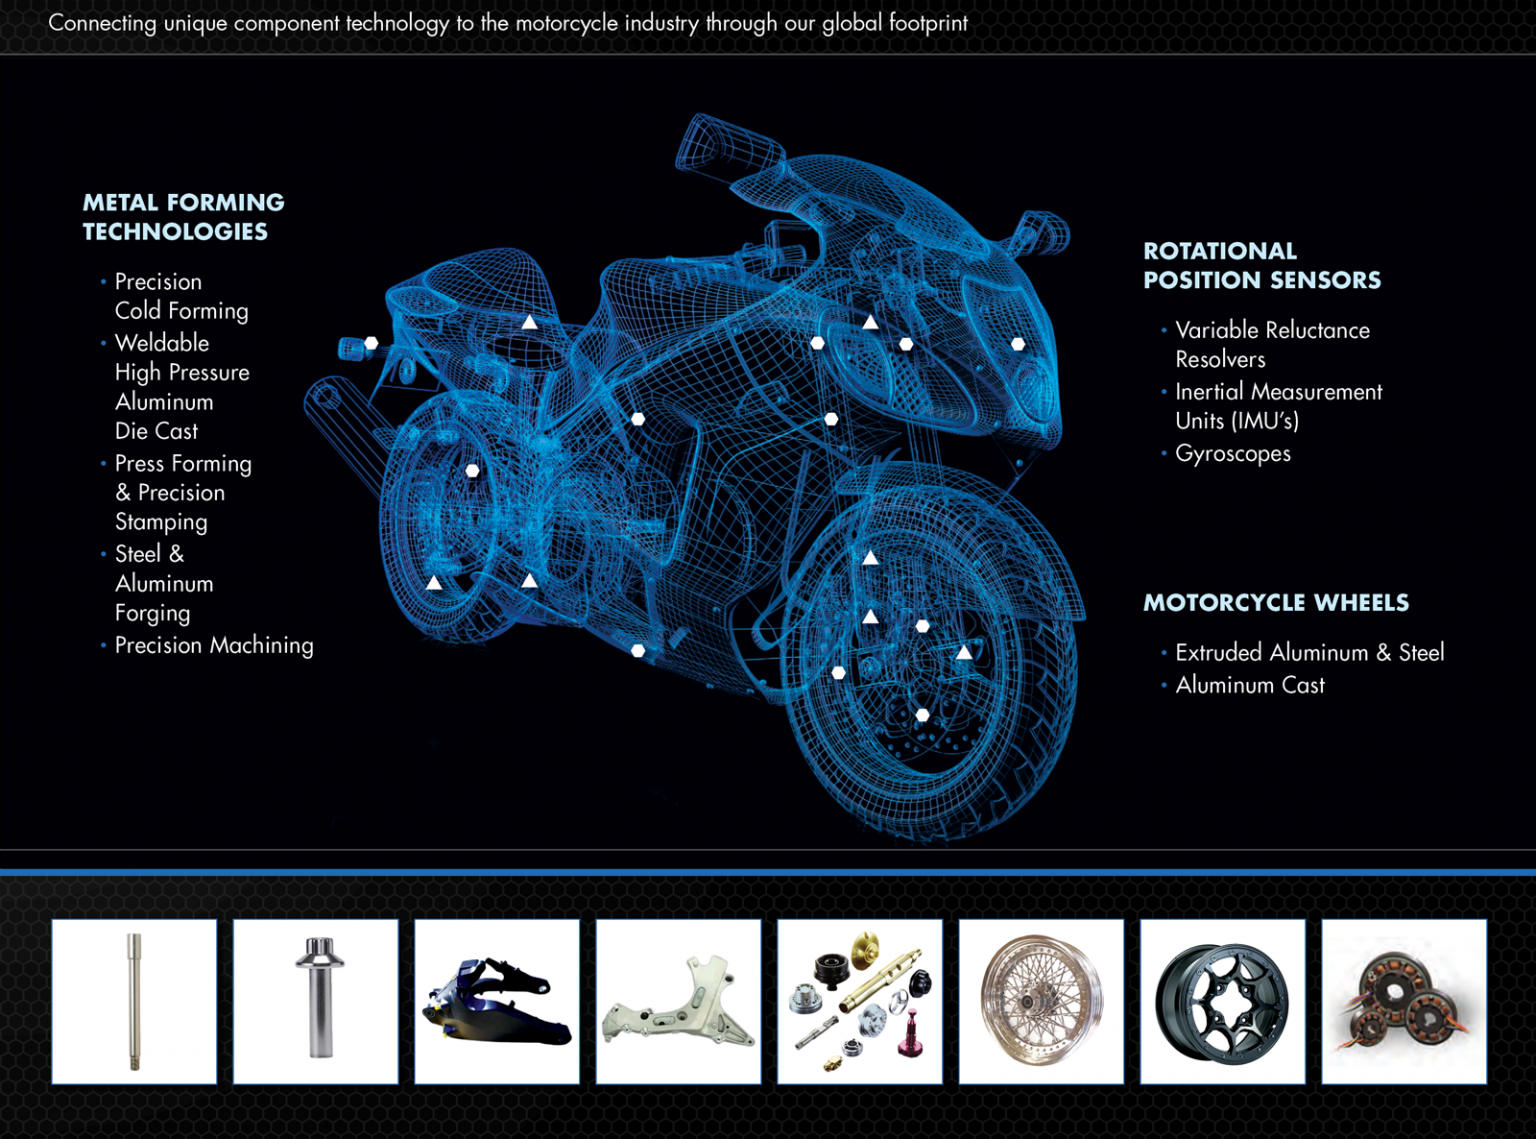 Motorcycle Applications